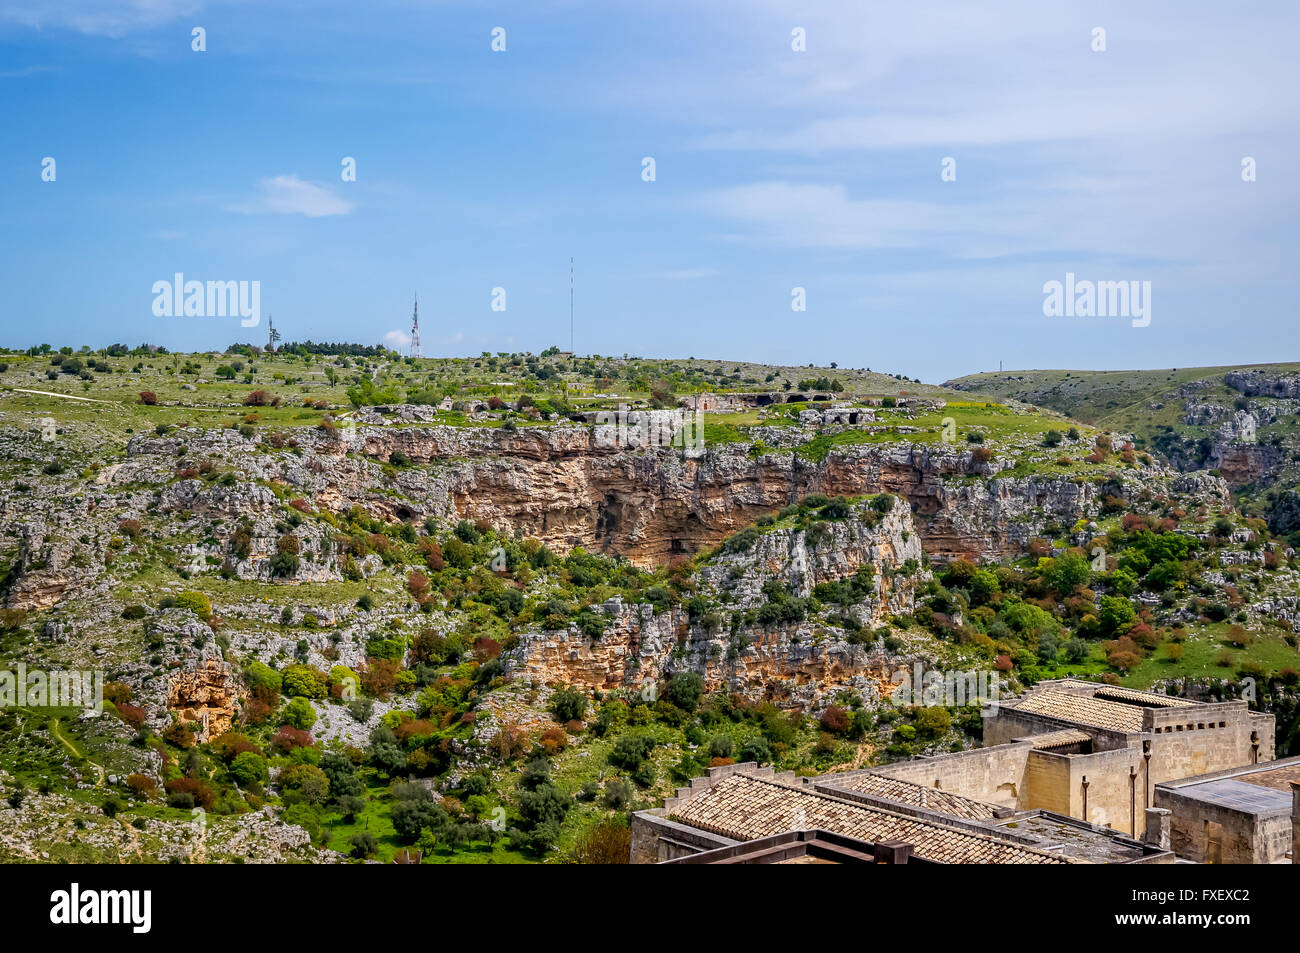 View of the Park of the Rupestrian Churches from the town of Matera, Basilicata, Italy Stock Photo